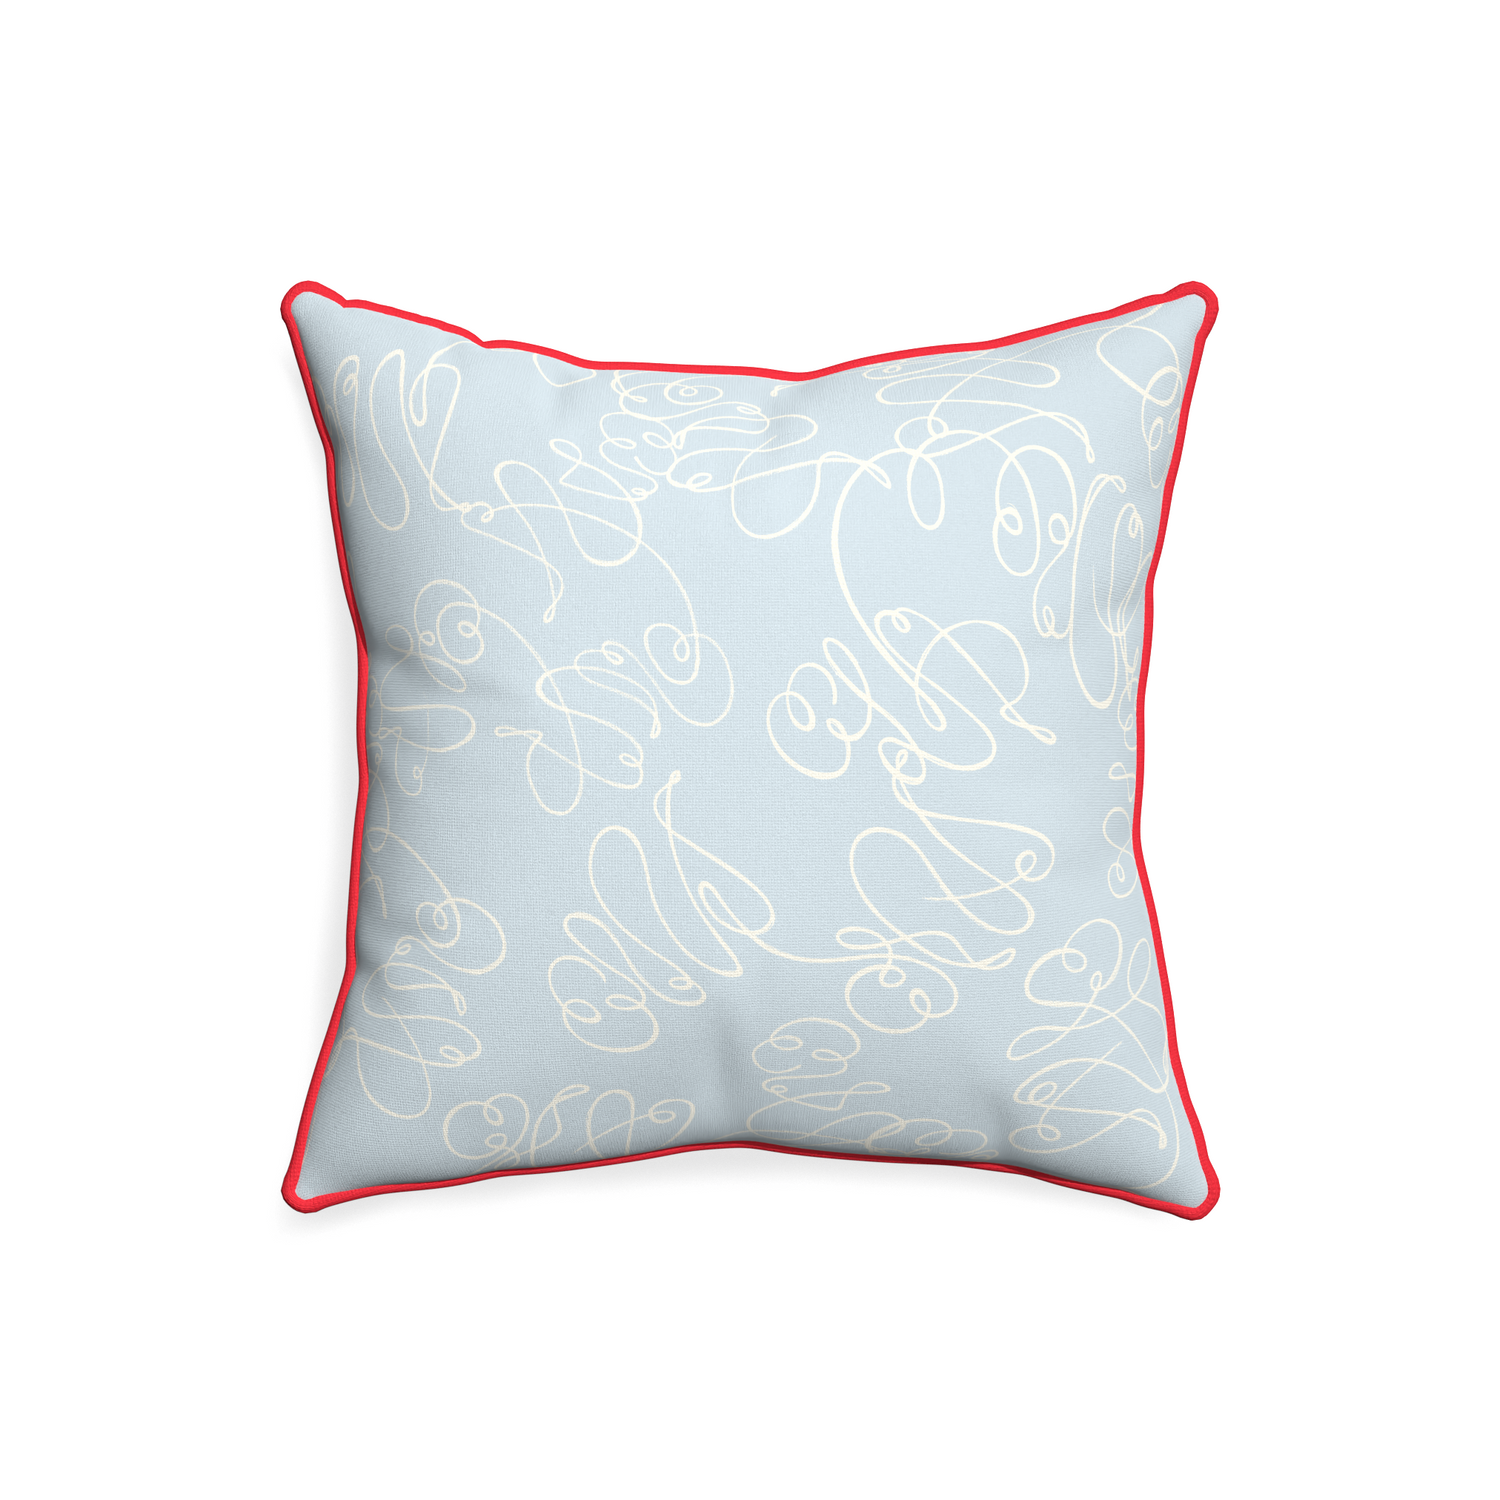 20-square mirabella custom pillow with cherry piping on white background